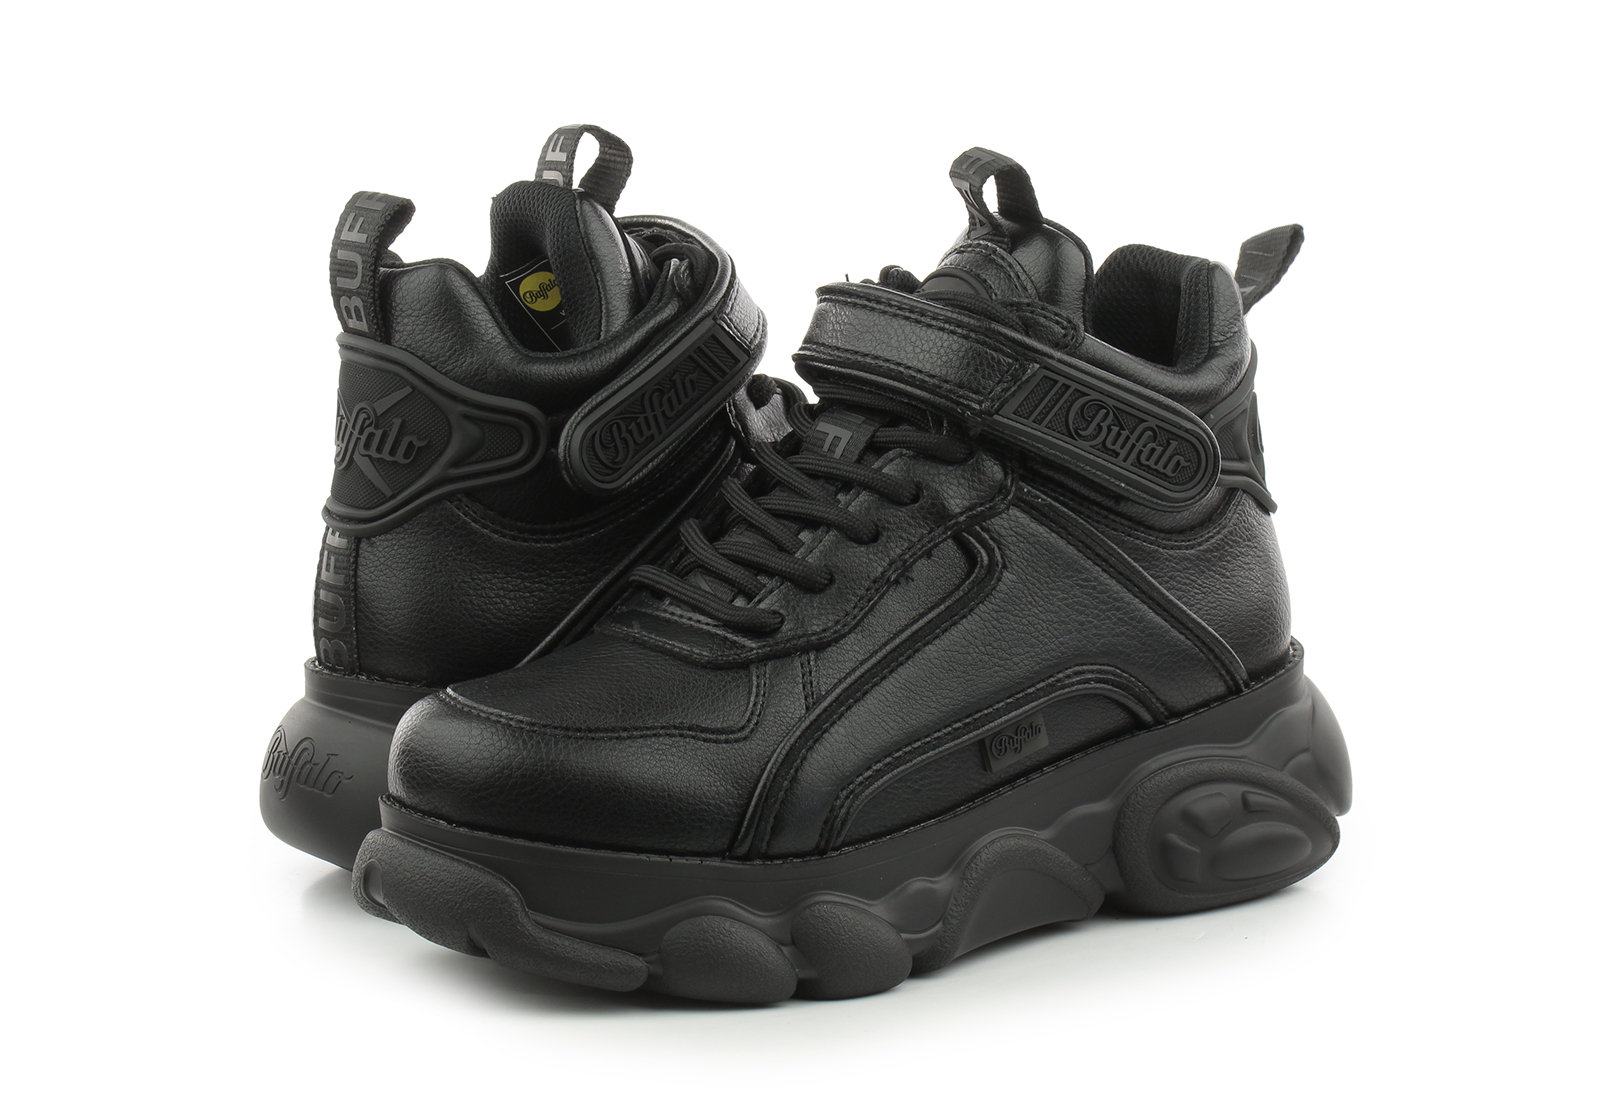 Buffalo High shoes - Cld Corin Mid - 1630769-blk - Online shop for  sneakers, shoes and boots